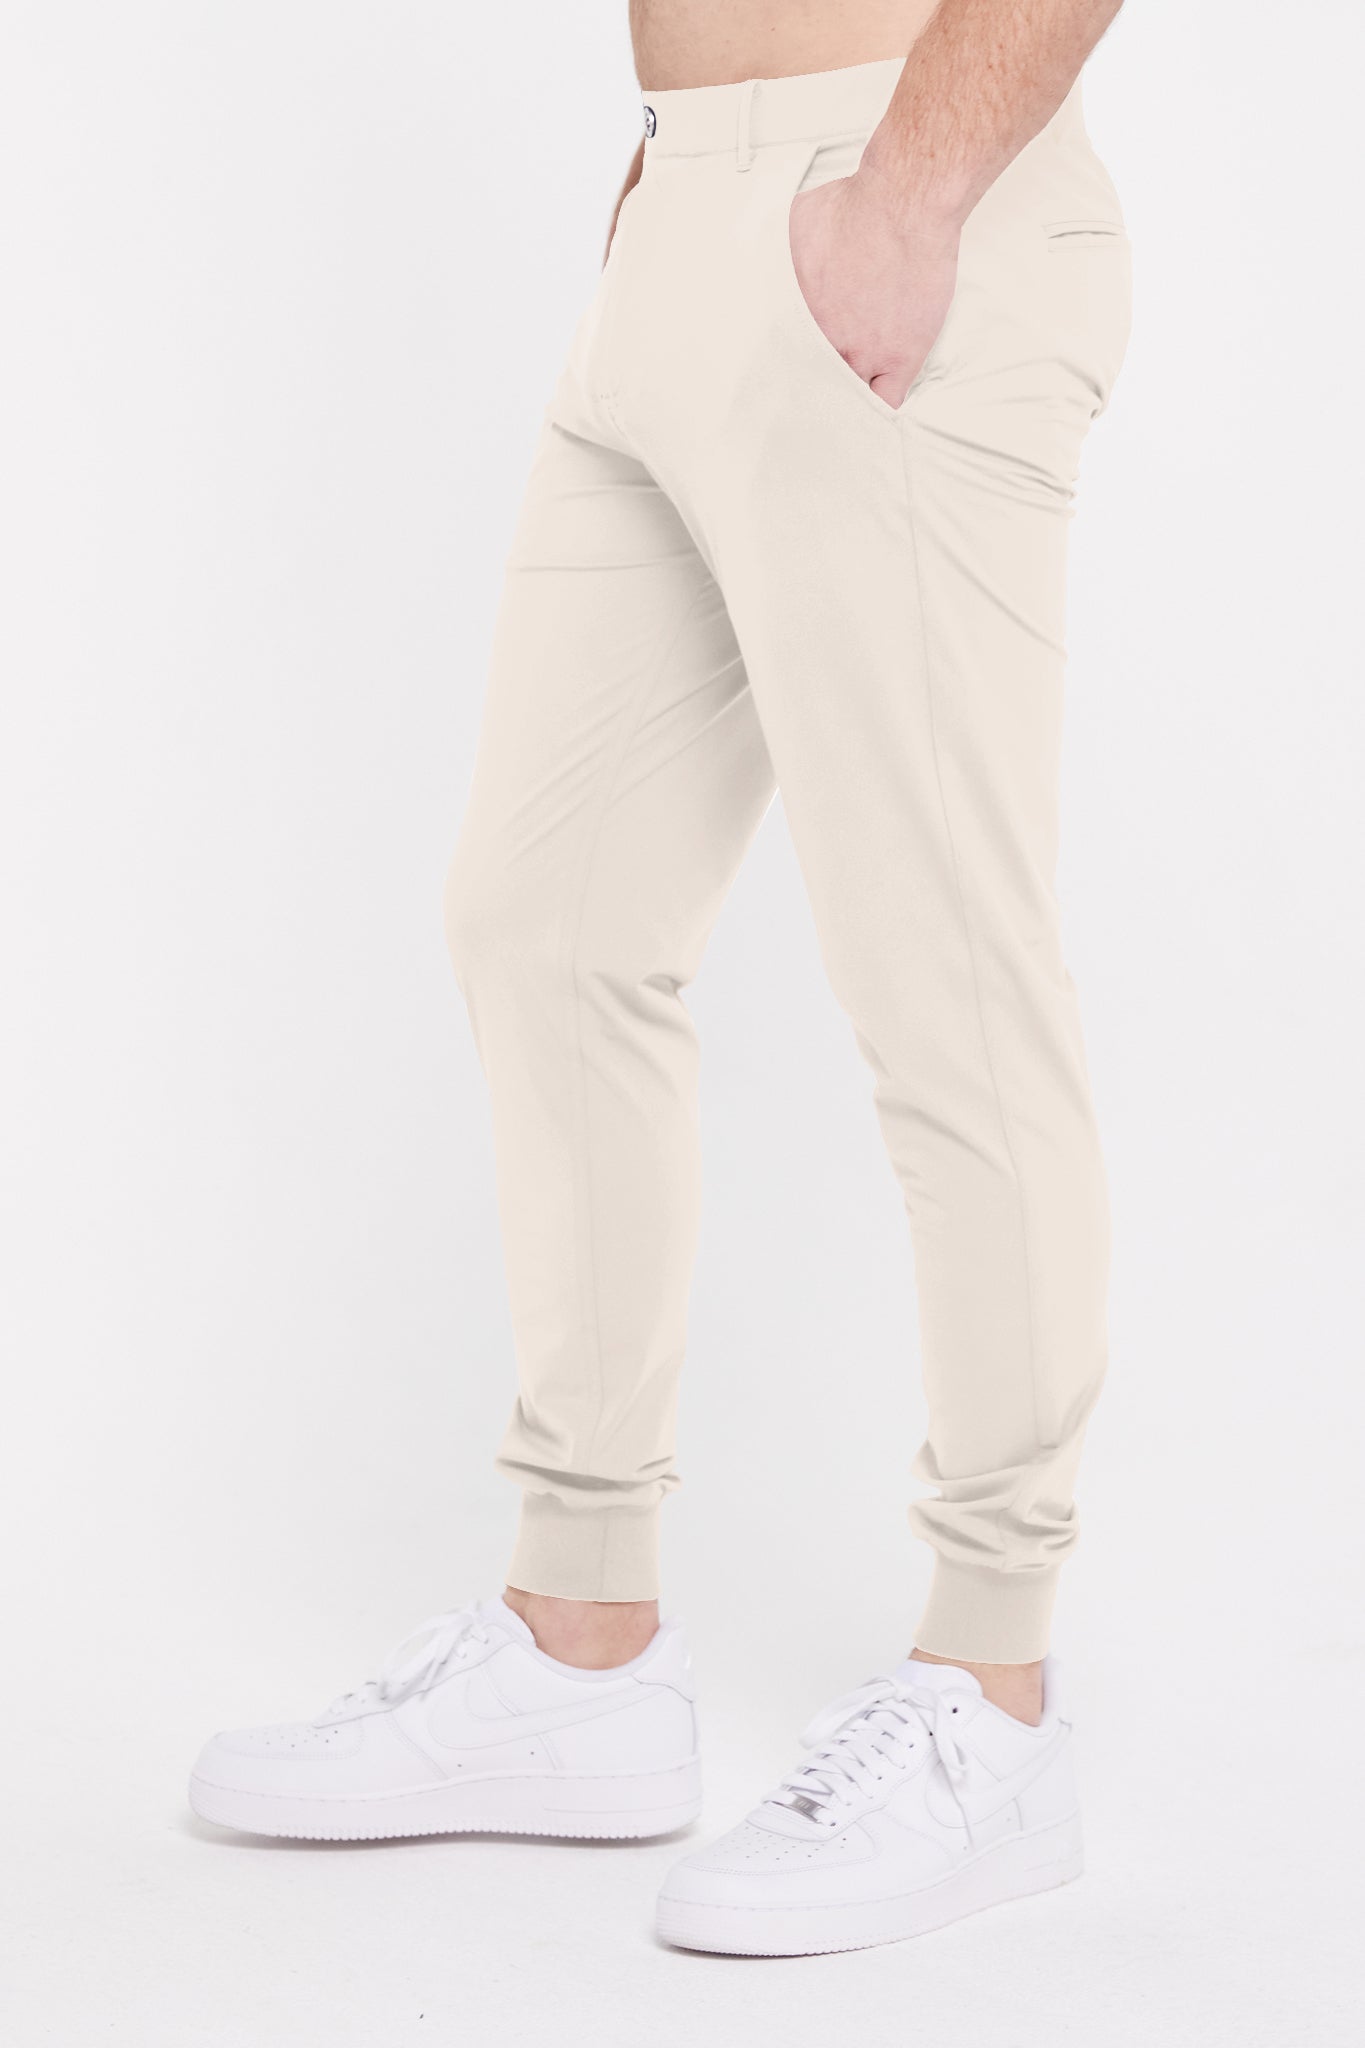 Image of the halliday pull-on jogger in macadamia